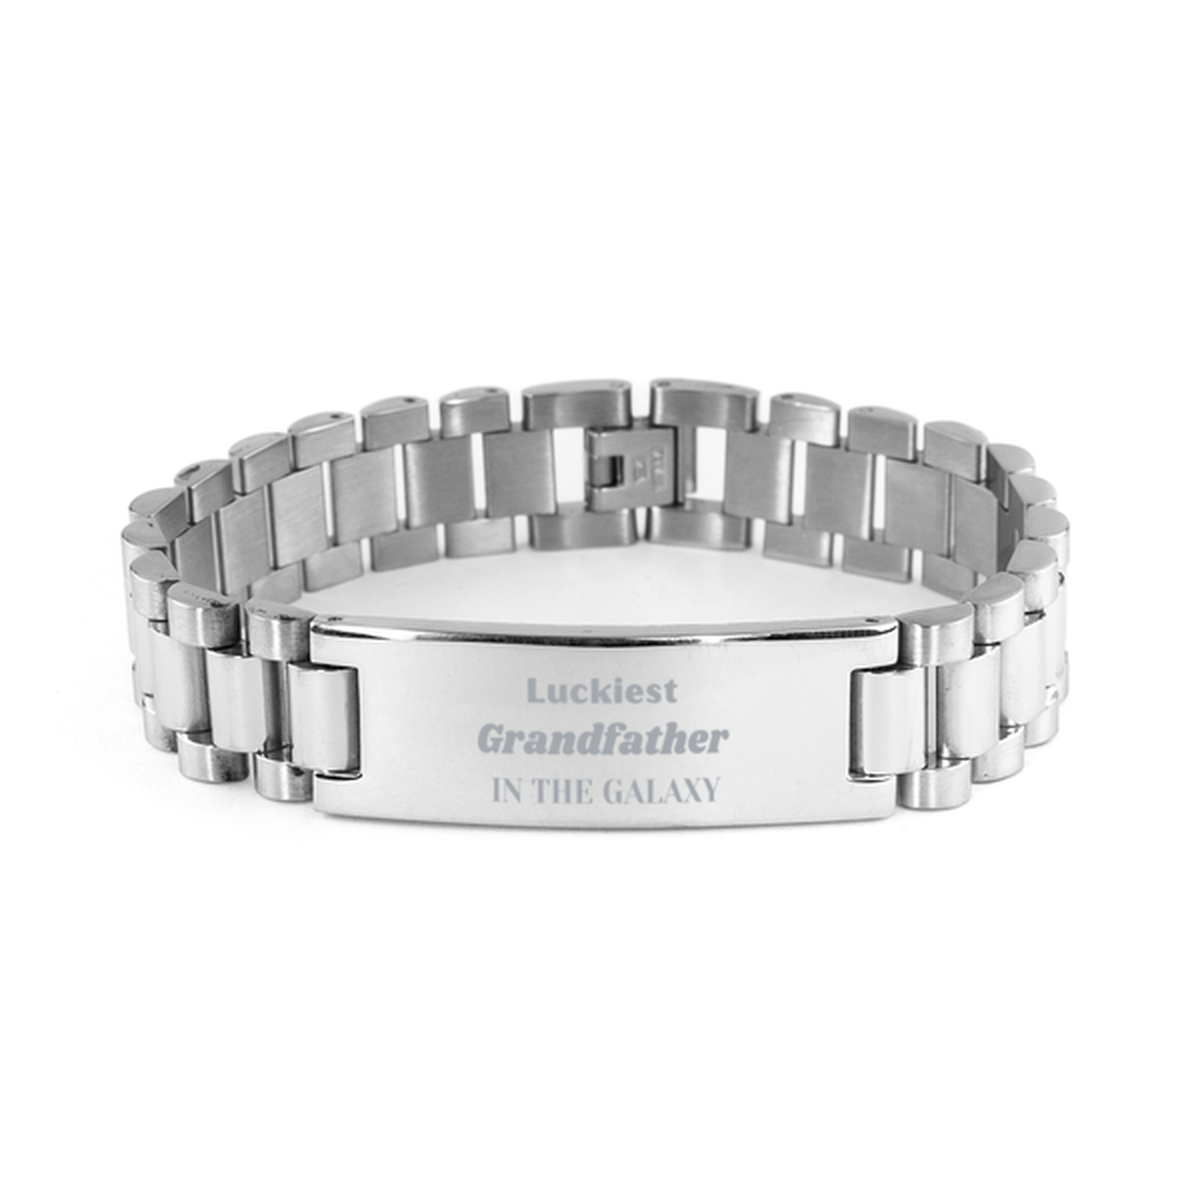 Luckiest Grandfather in the Galaxy, To My Grandfather Engraved Gifts, Christmas Grandfather Ladder Stainless Steel Bracelet Gifts, X-mas Birthday Unique Gifts For Grandfather Men Women